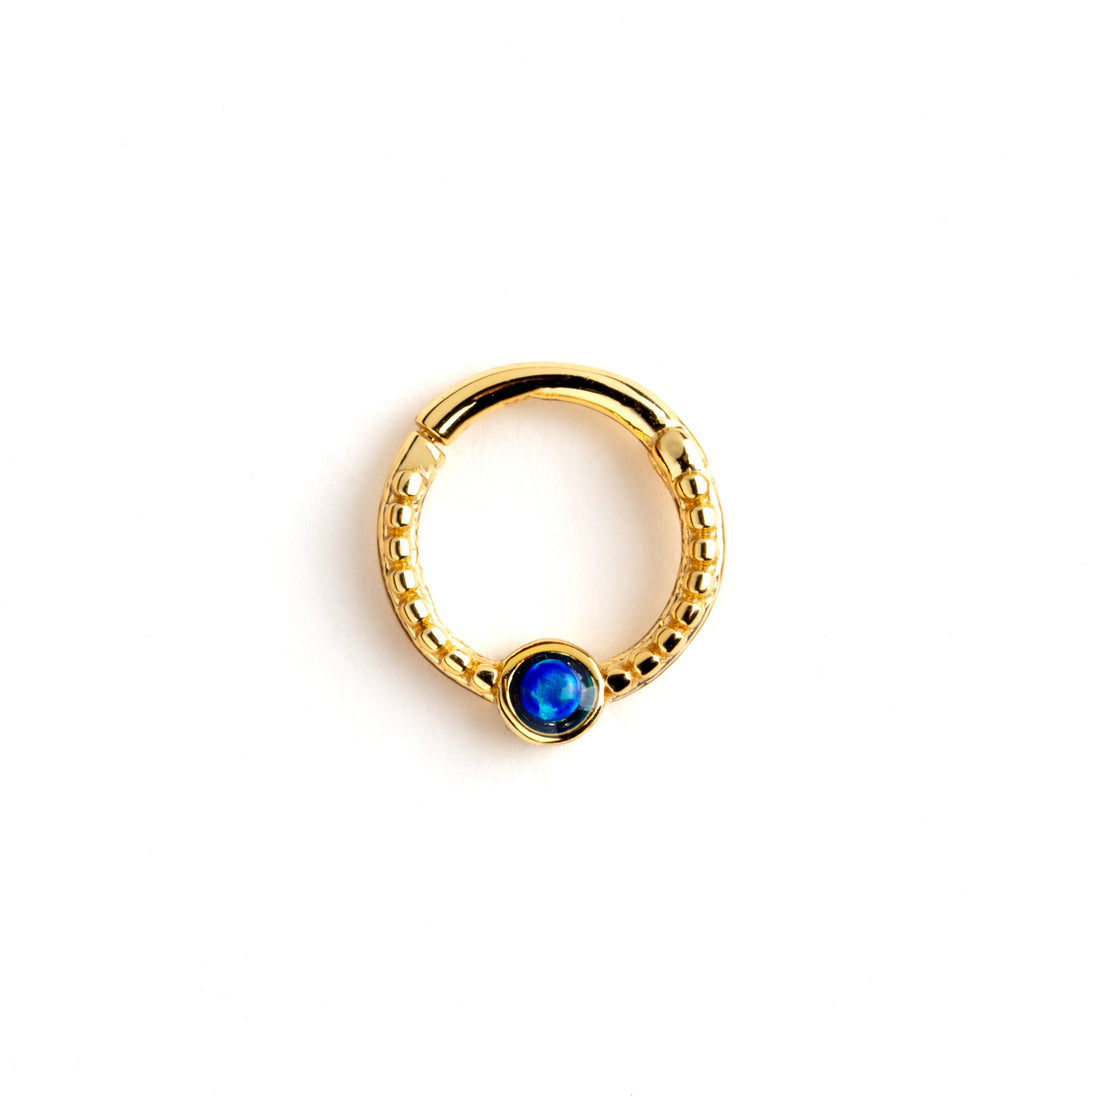 Dayaa gold surgical steel septum clicker with blue opal frontal view